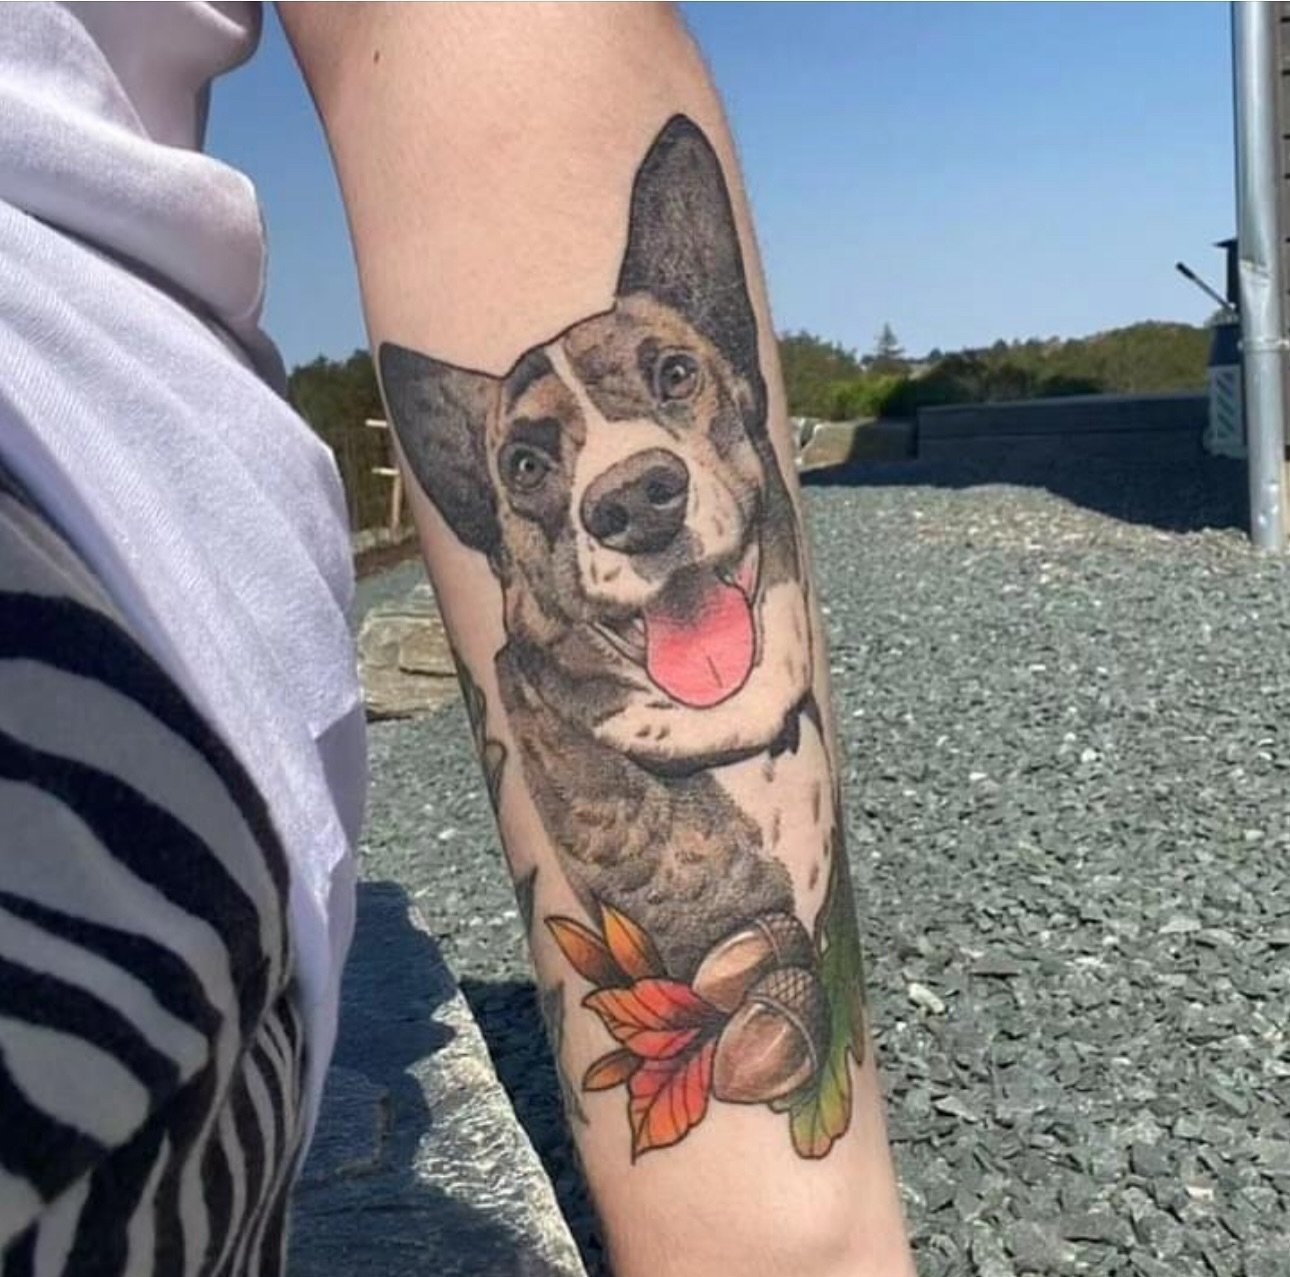 Healed tattoo by Christine. For bookings: christine.letsbuzz@gmail.com @christine_pang #letsbuzz #letsbuzzbergen #letsbuzztattoo #bergen #bergennorway #tattoobergen  #norwegiantattooers #tattoo #tattooinspiration  #dogportrait #healedtattoo